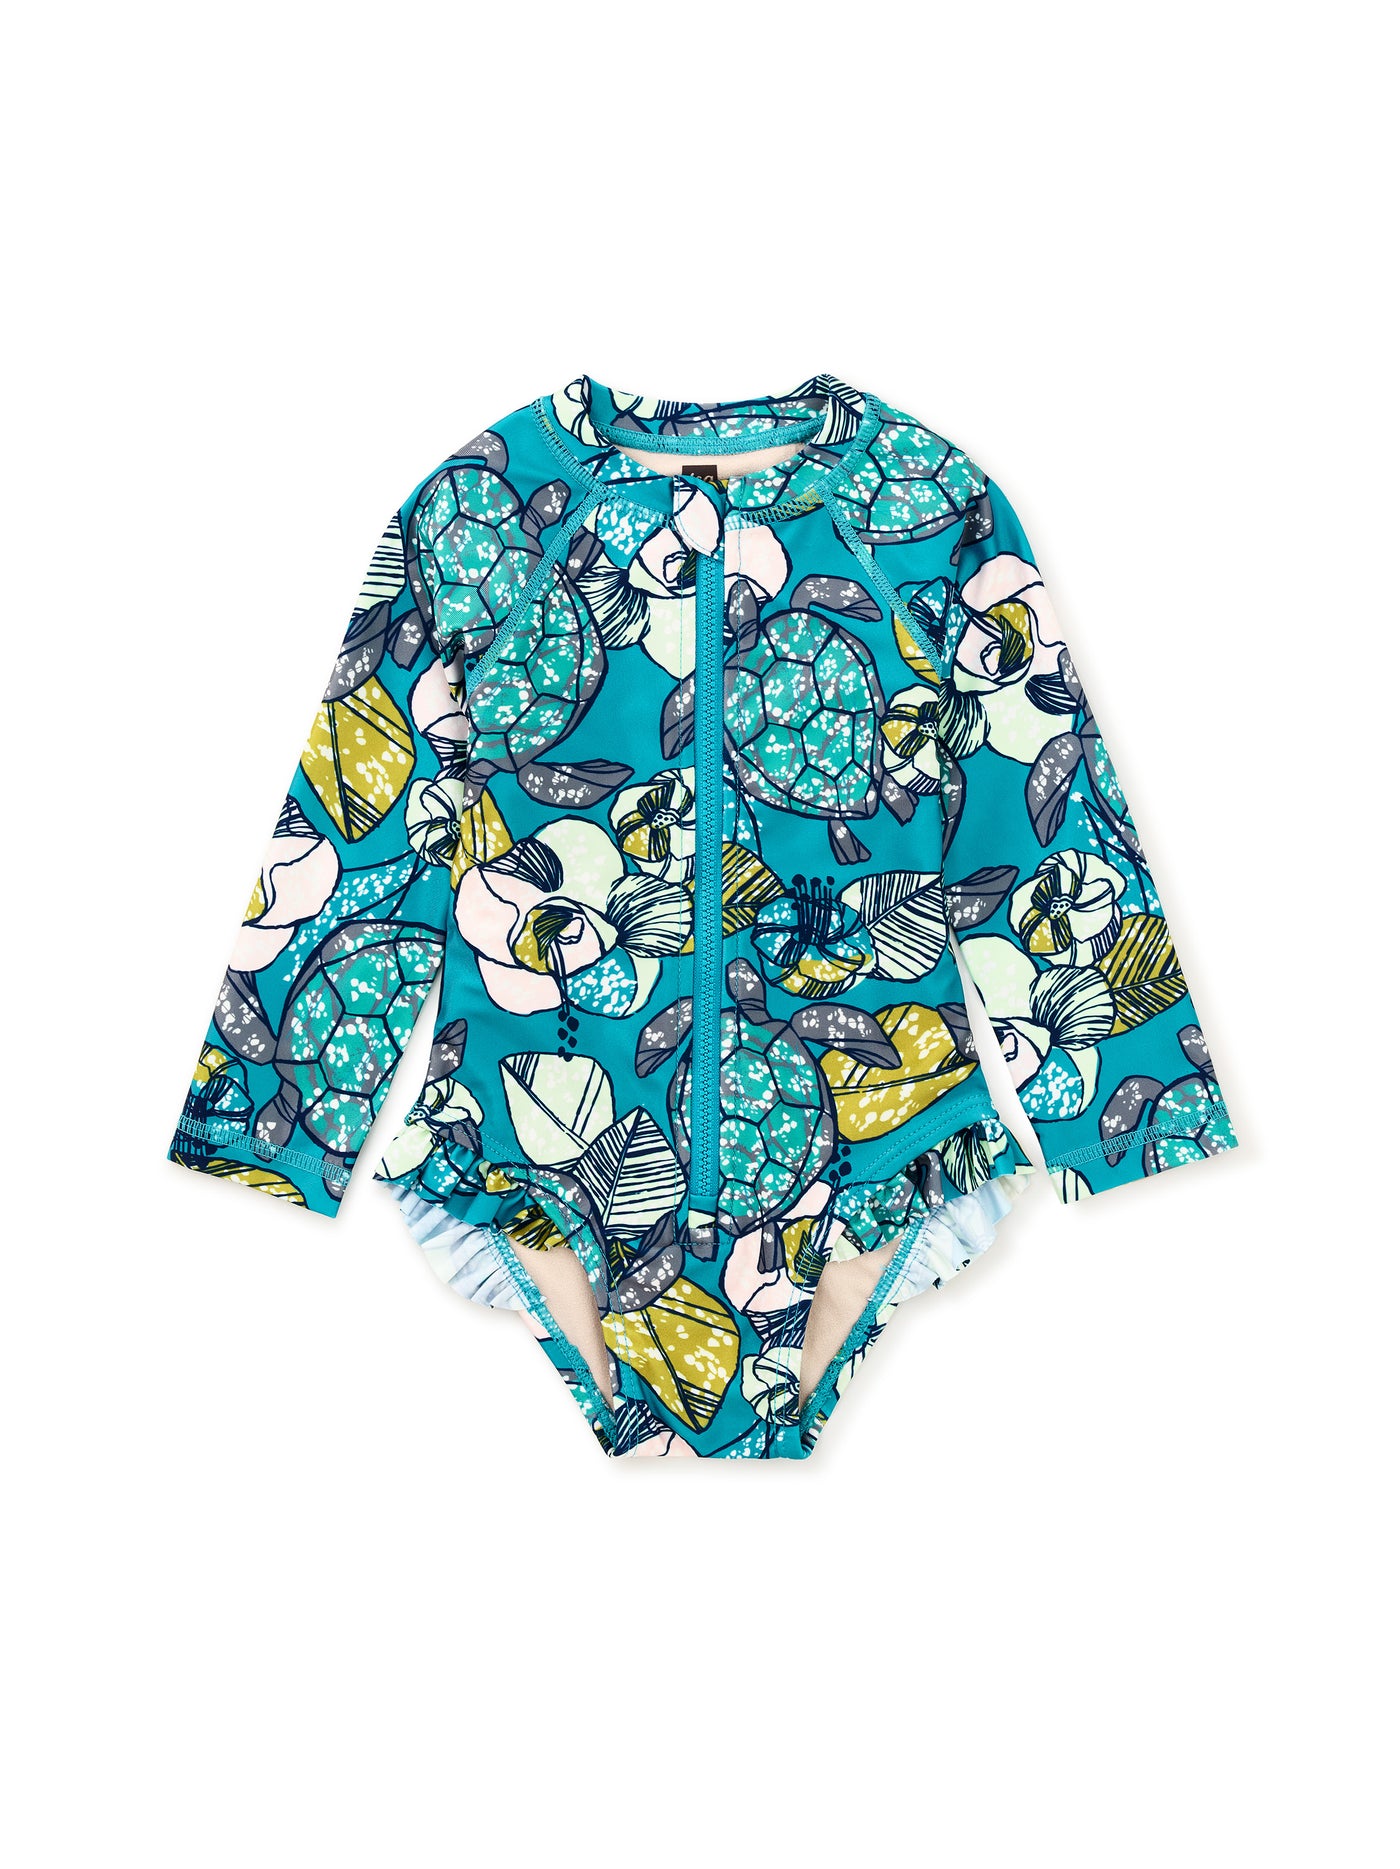 Turtle Floral Baby Rash Guard Swimsuit